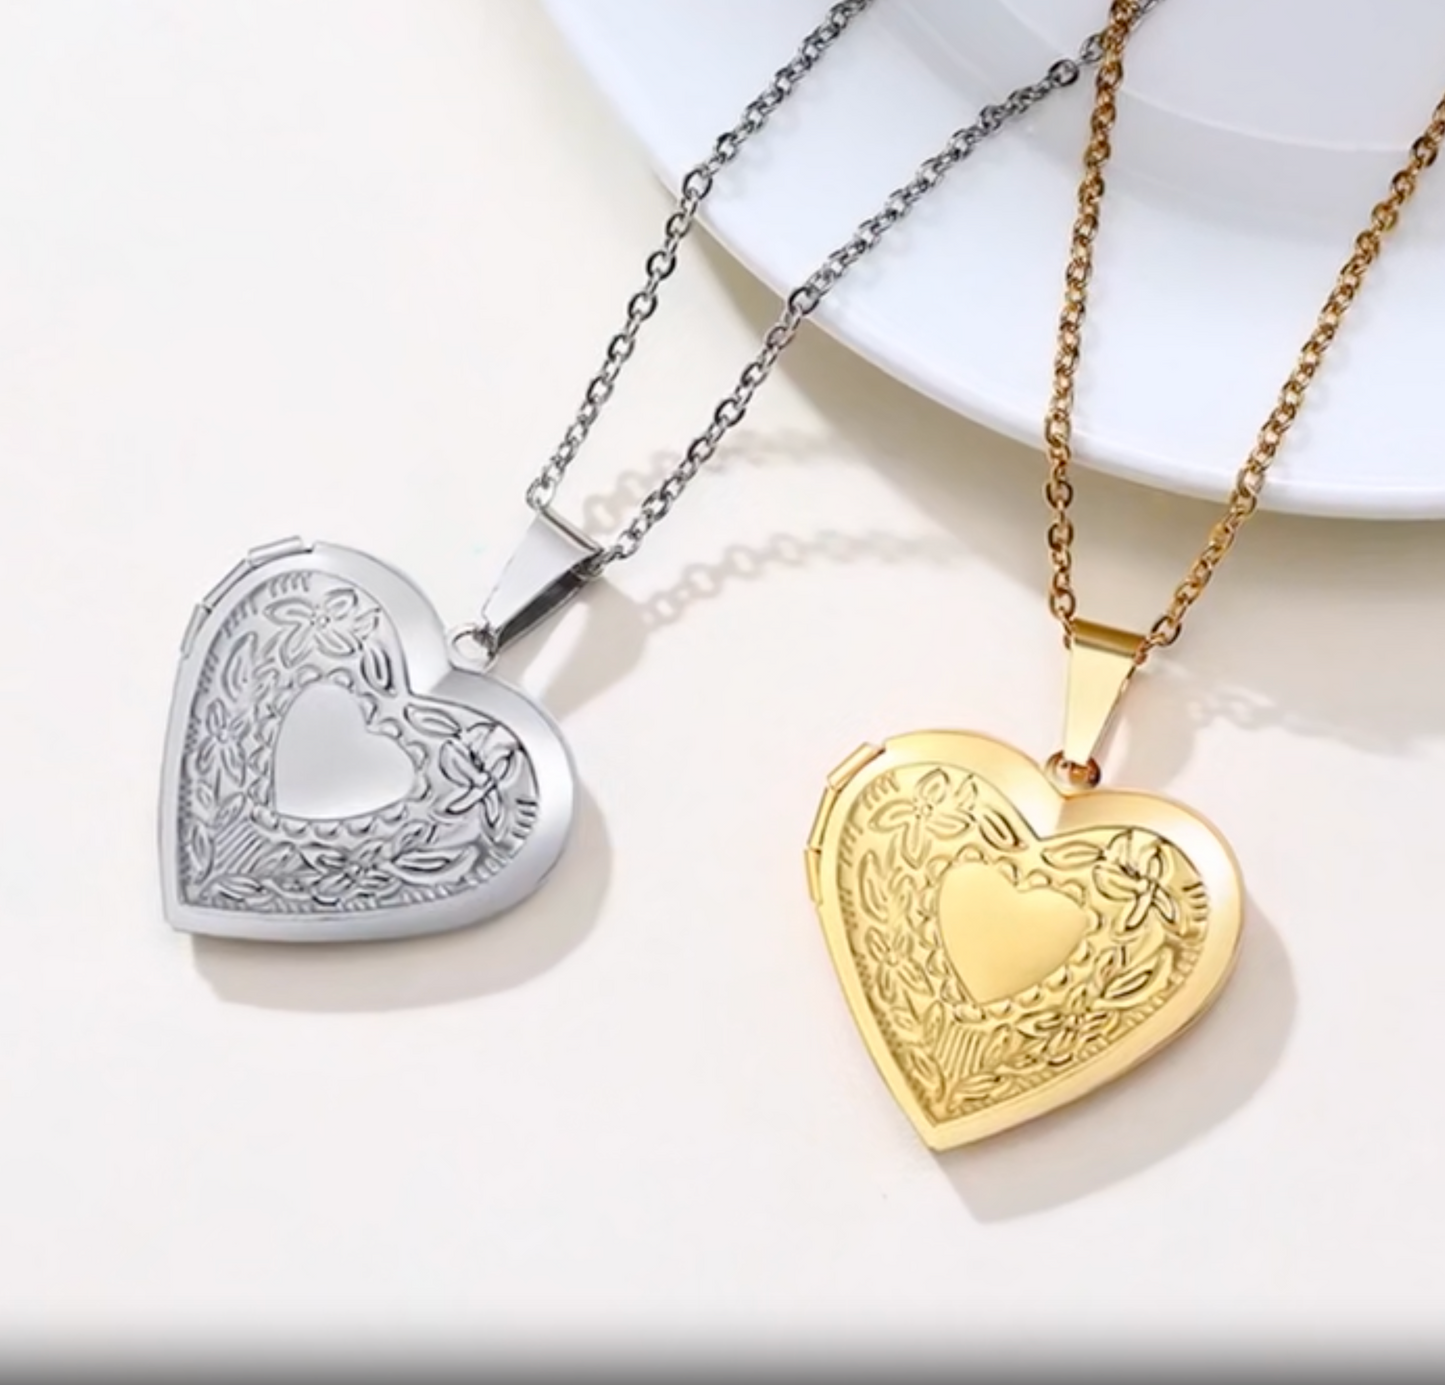 Women Necklaces Heart Locket Pendant Family Image Personalized Anniversary Gift Customize Picture Name